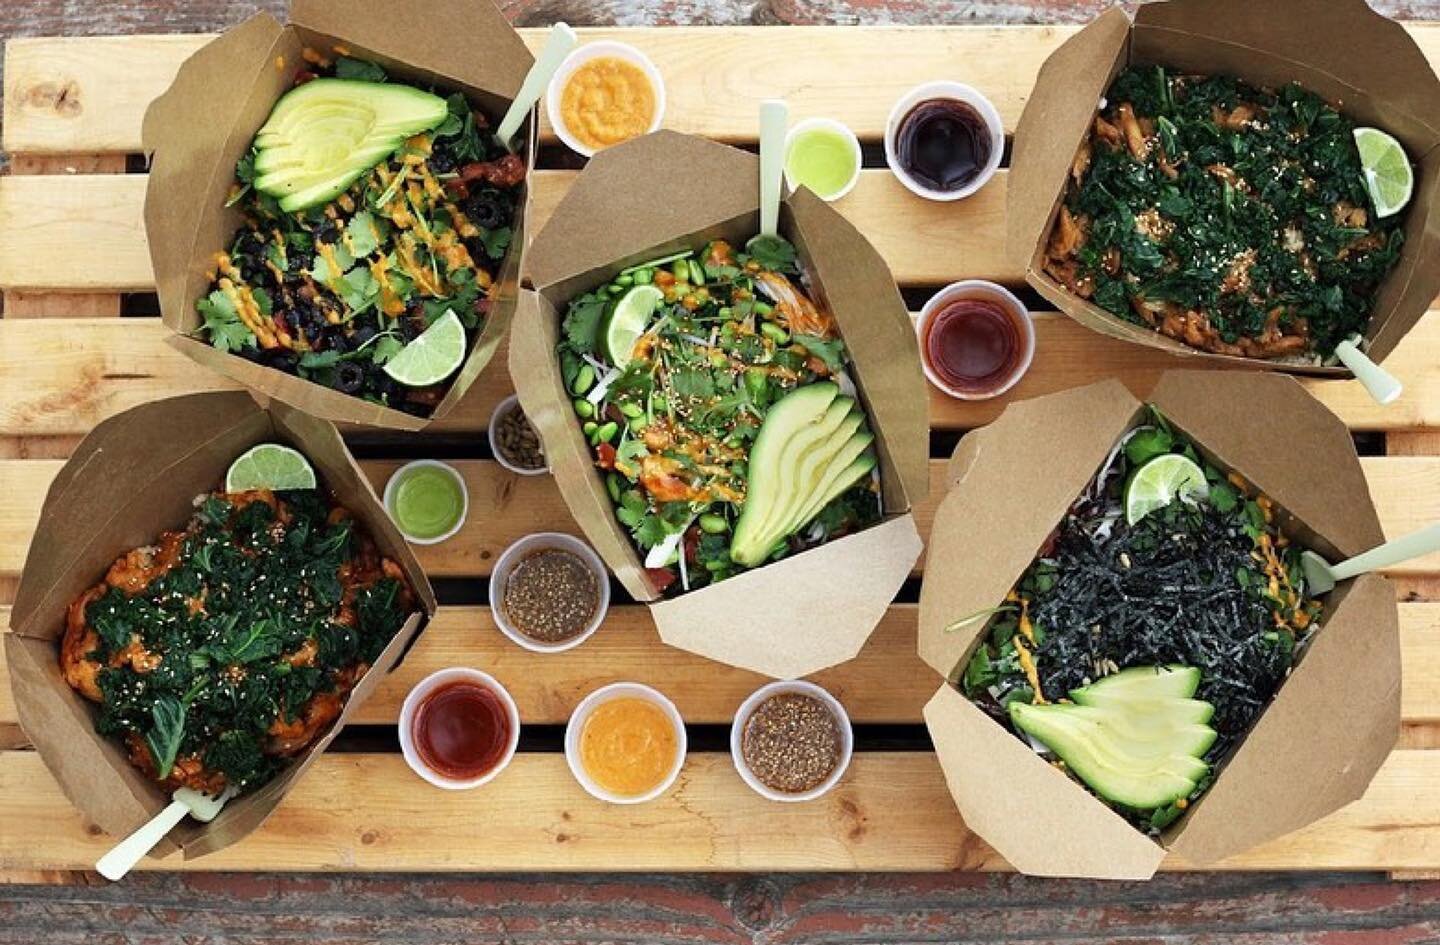 Join us for lunch today! 🌱 Goodness like this delicious spread from @veggiebowlpdx awaits. #Corner14 #OregonCity